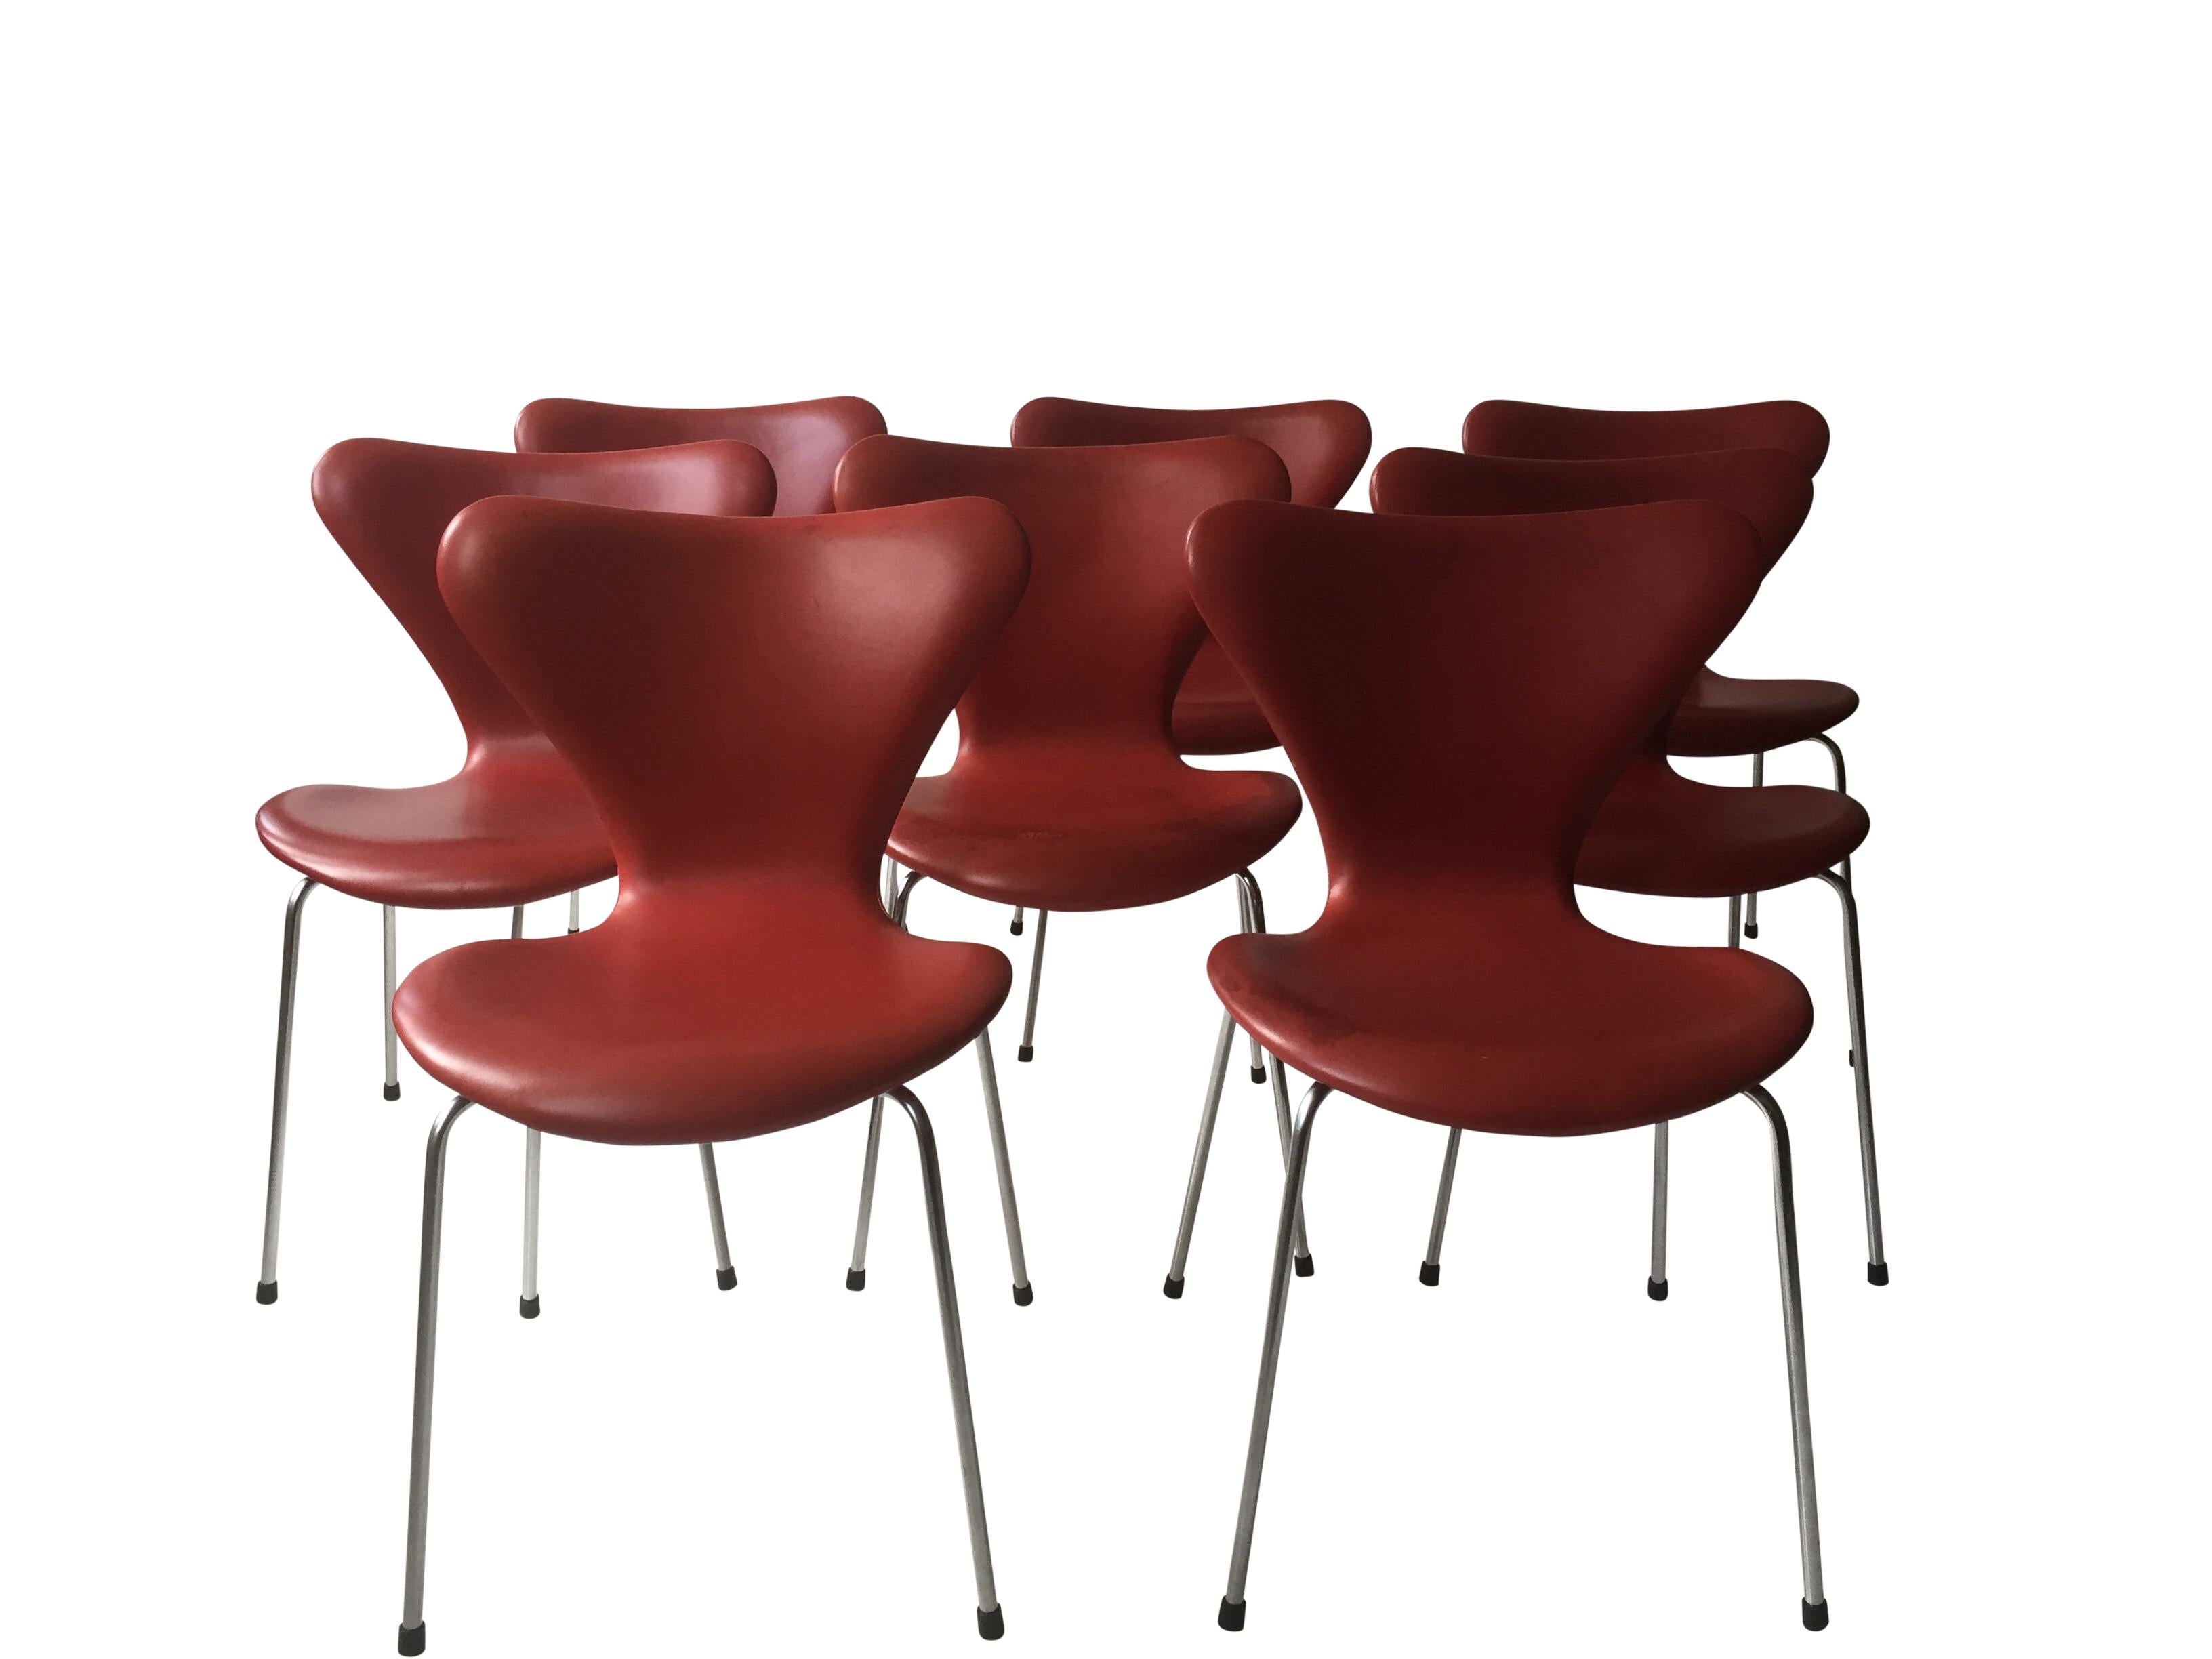 Set of Eight Danish Dining Chairs in Indian Red Leather by Arne Jacobsen 1960s For Sale 1